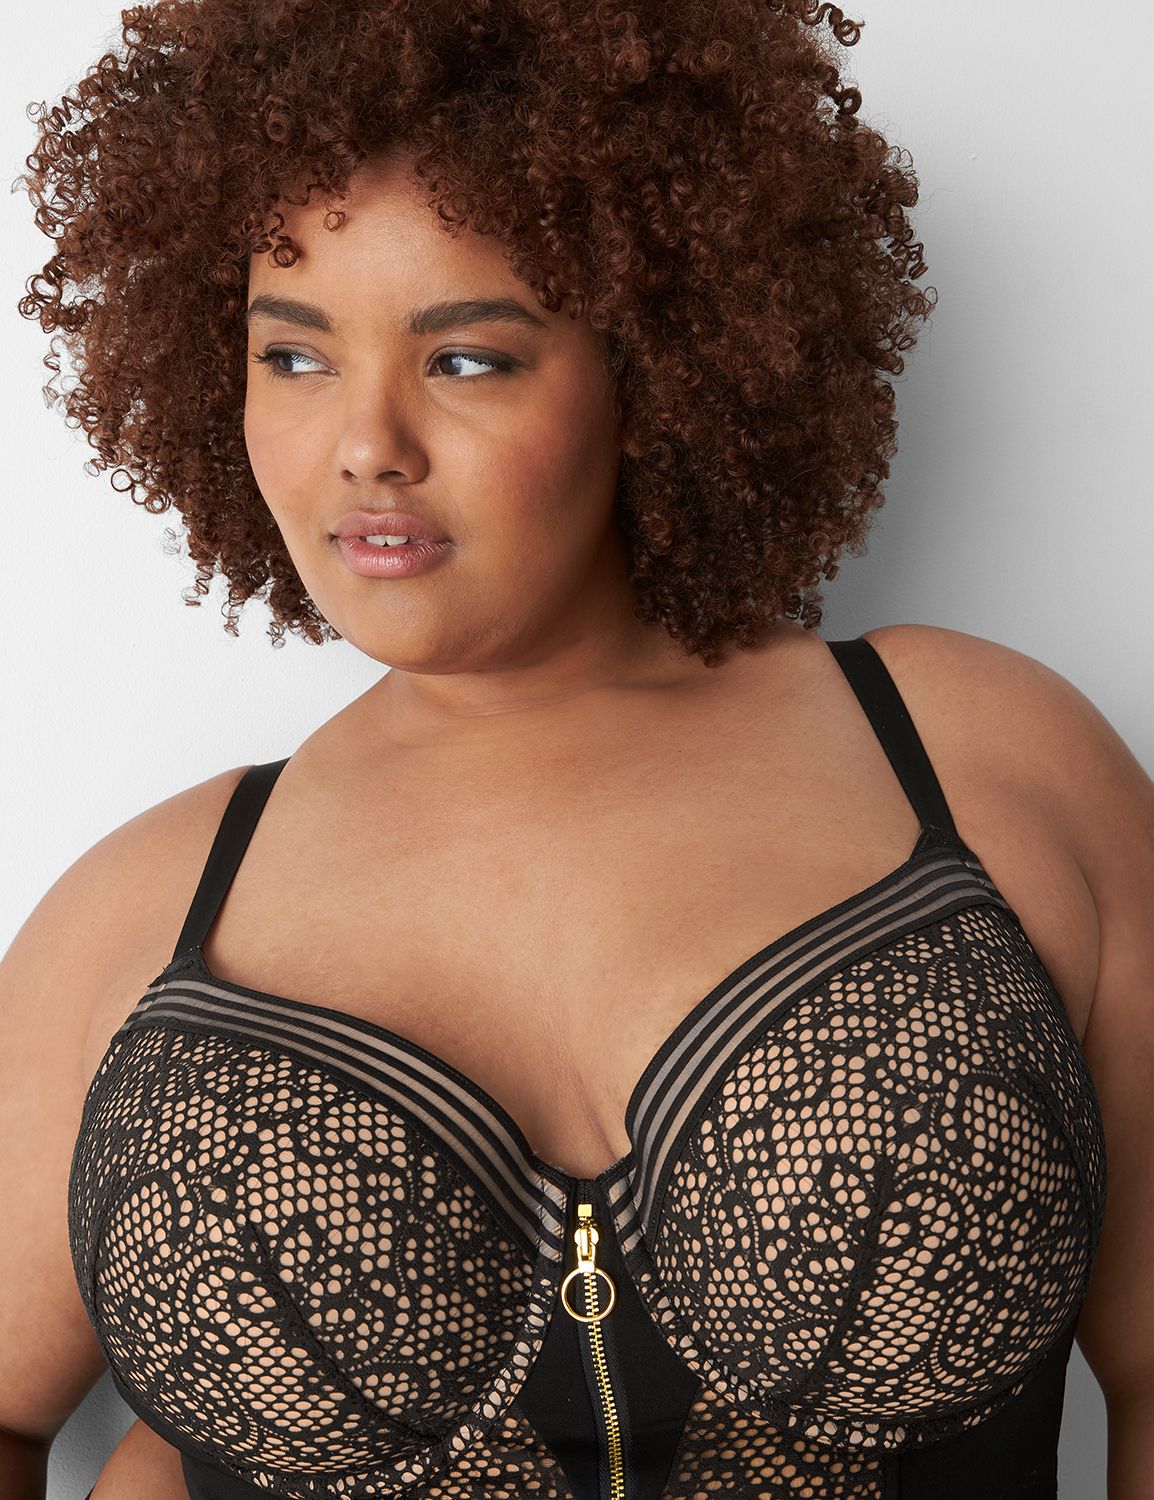 Lane Bryant - The NEW Boost Balconette. The perfect lift for when